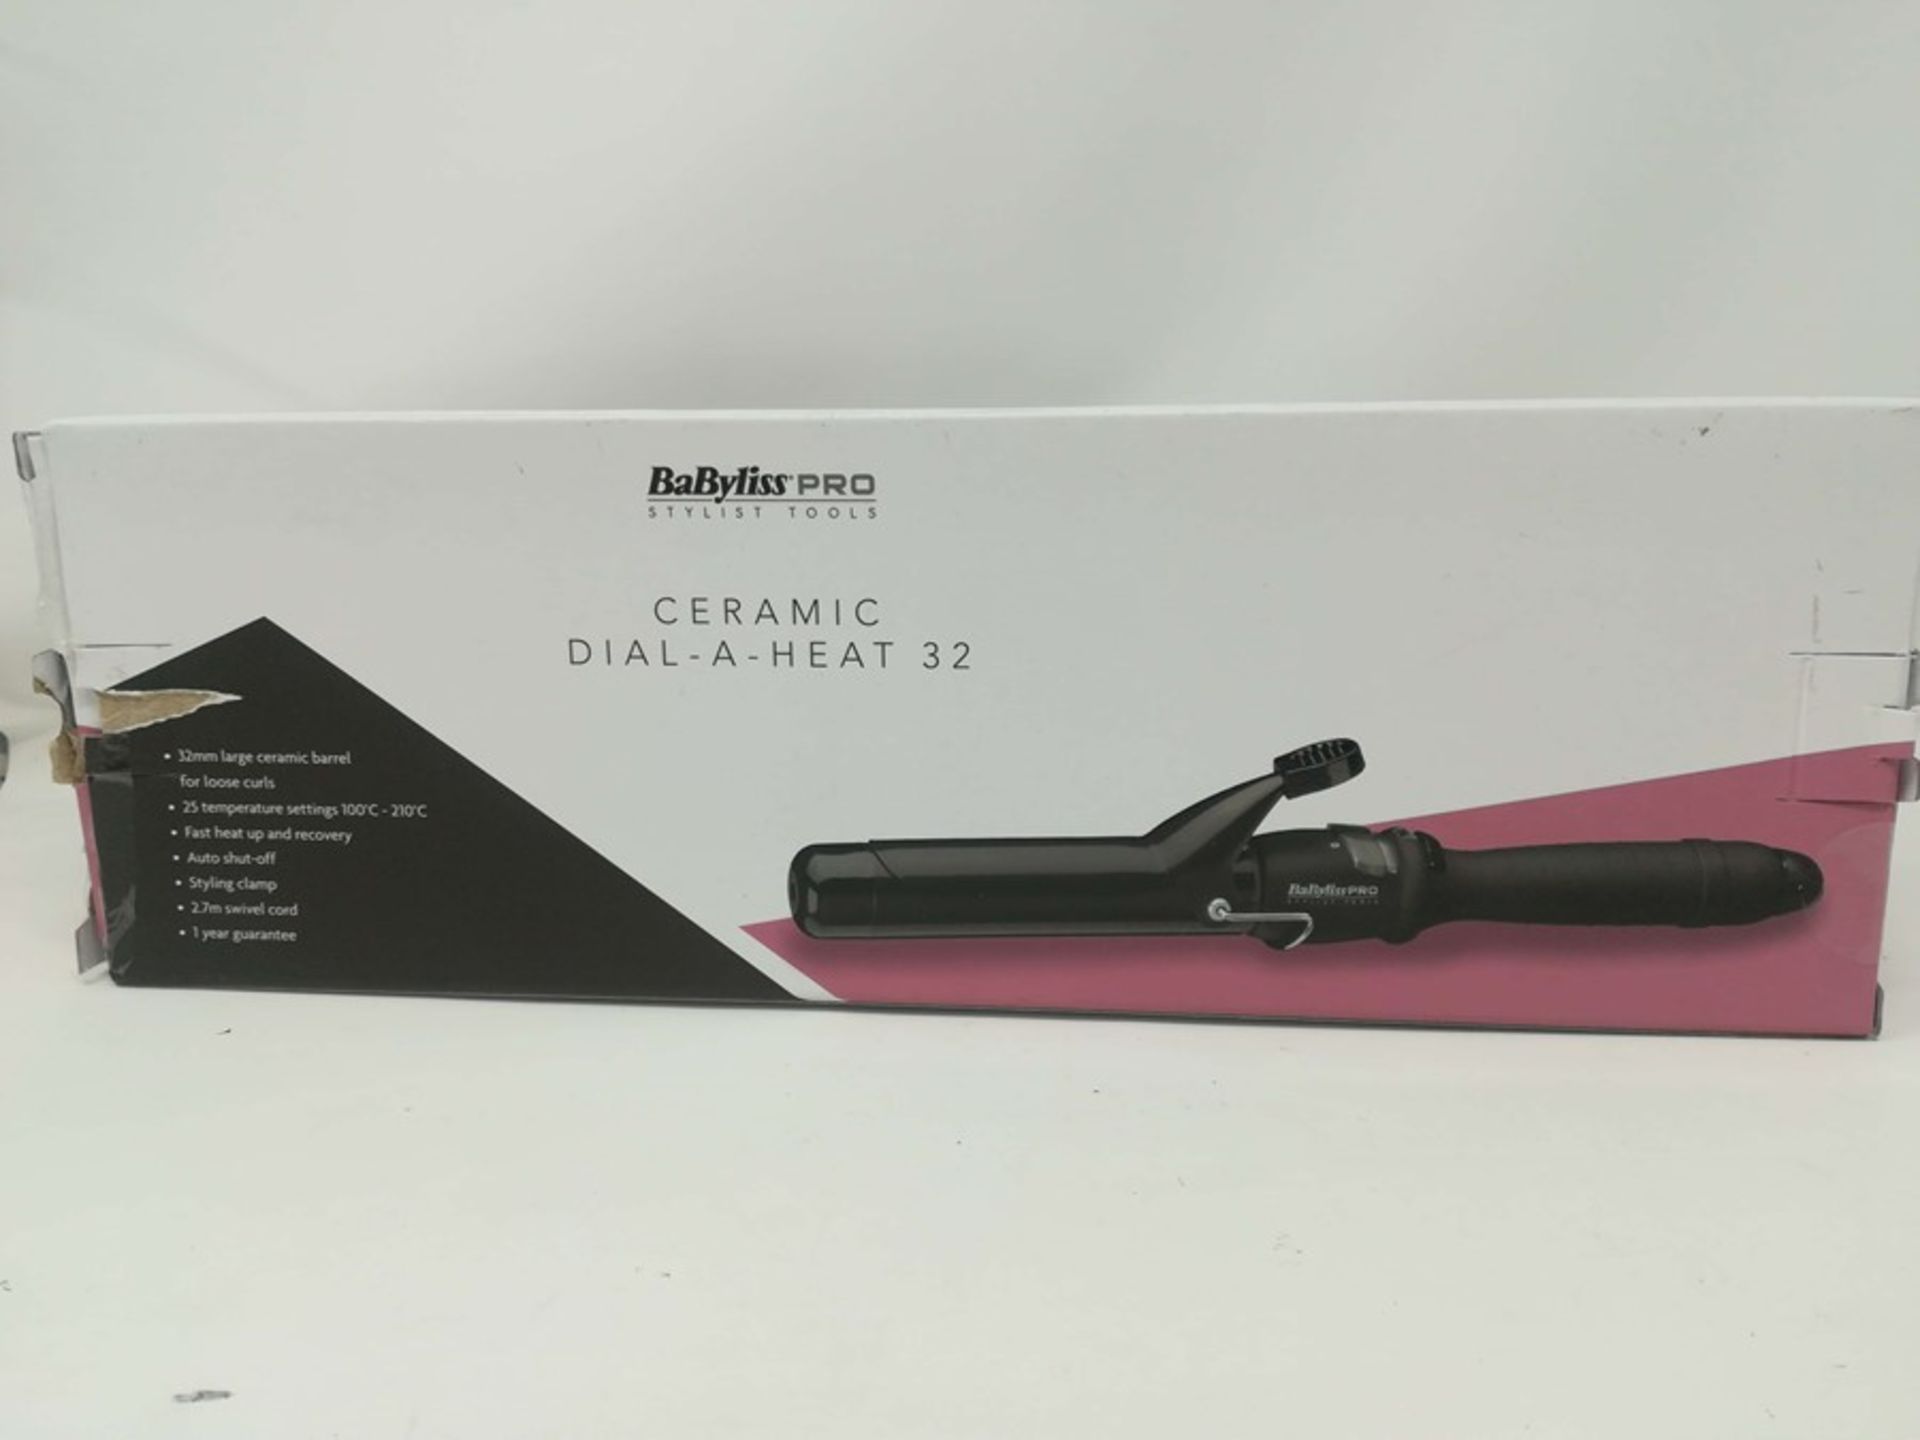 Babyliss 32mm Pro Ceramic Dial a Heat Curling Wand - Image 2 of 2